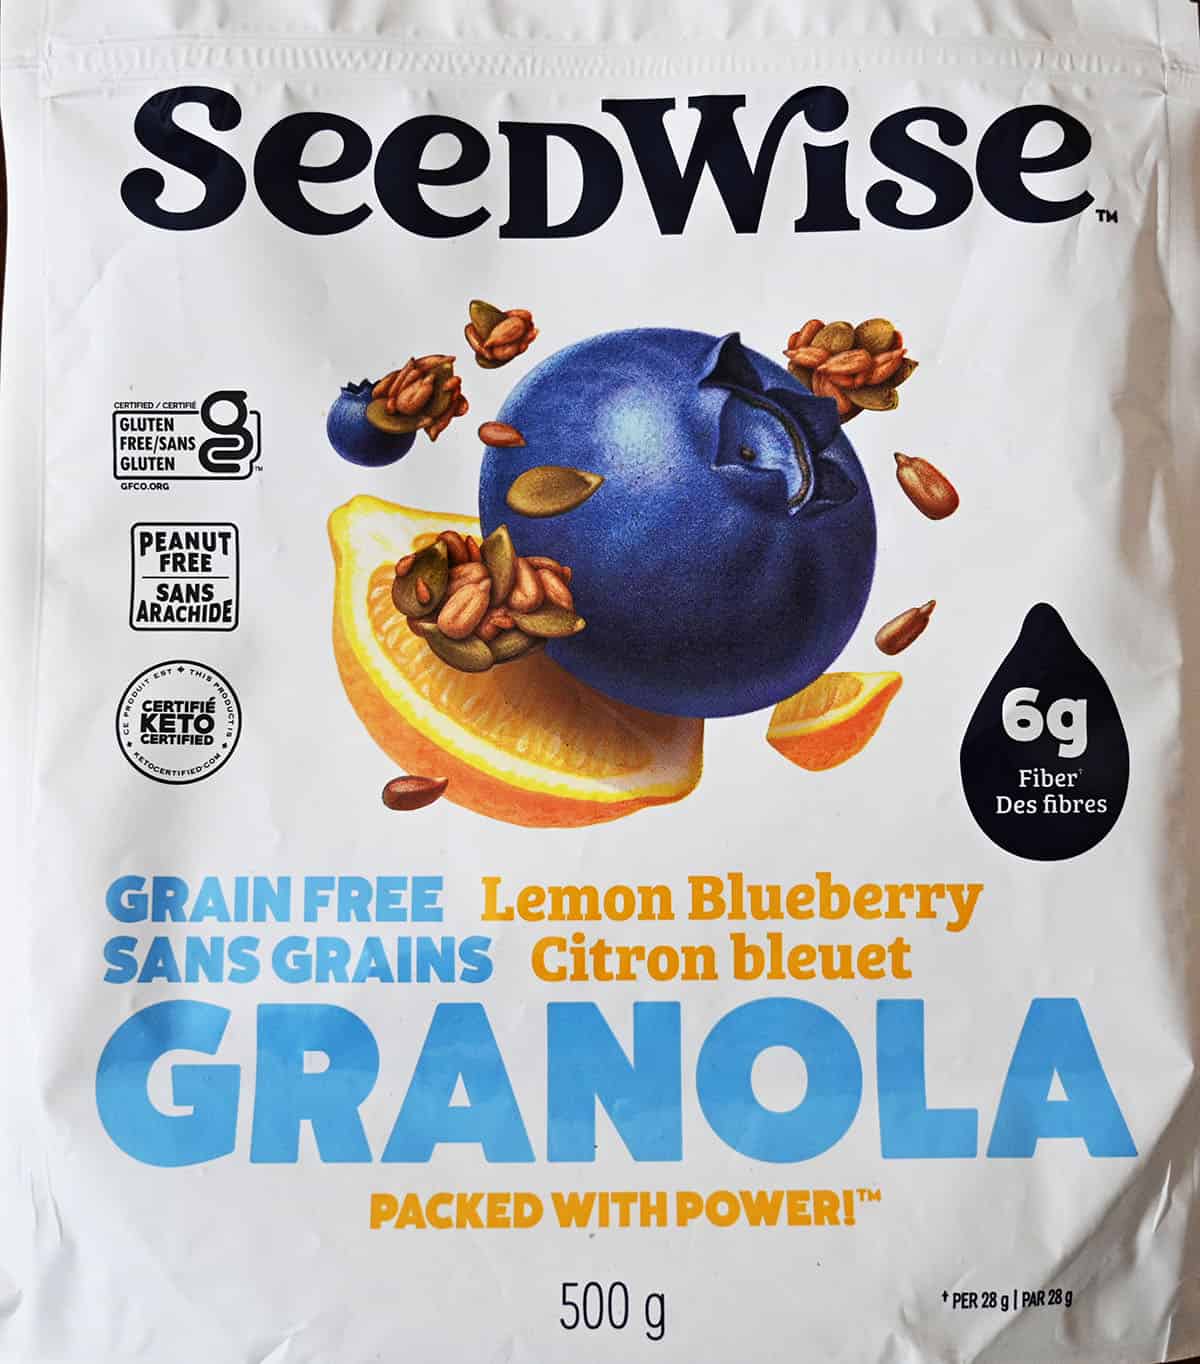 Closeup image of the front of the Seedwise granola bag.